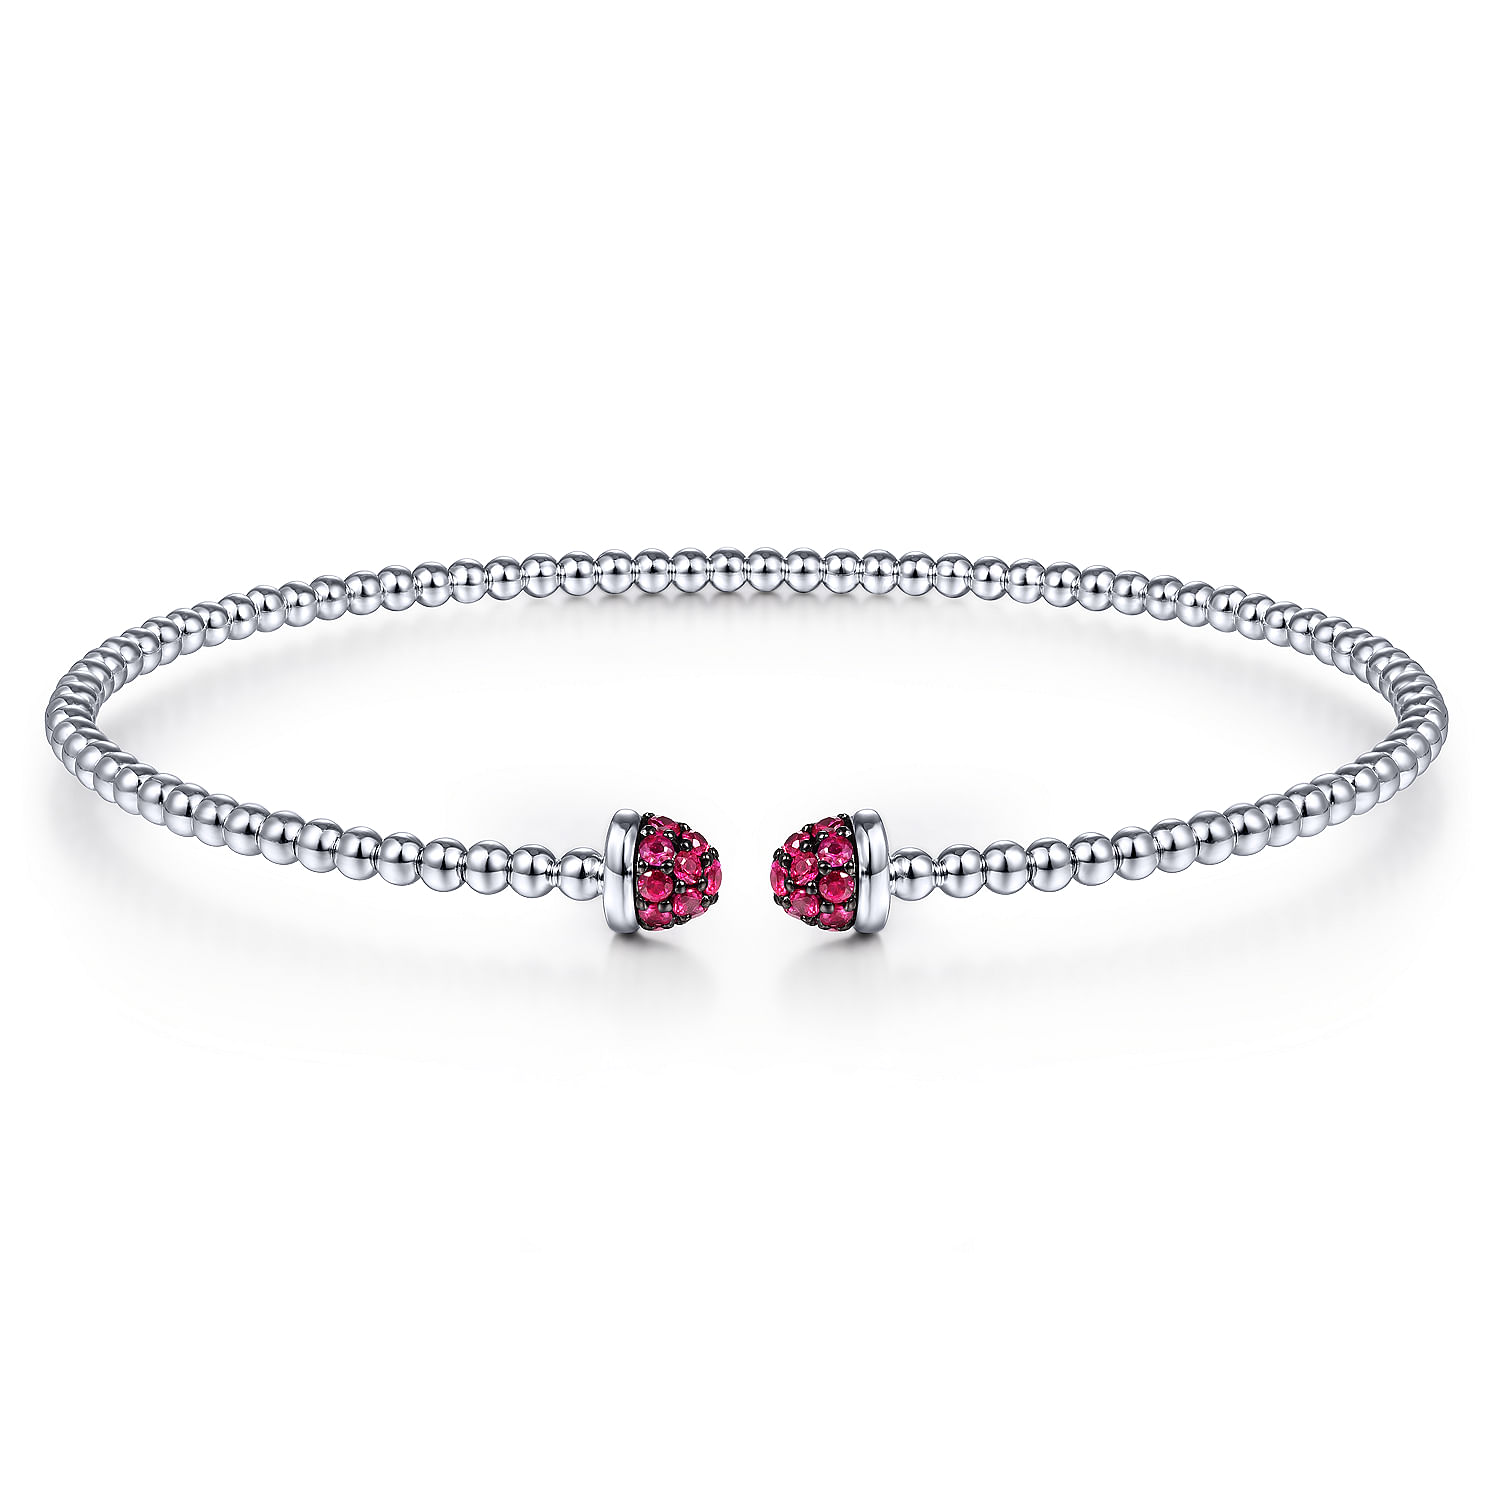 14K White Gold Bujukan Bead Cuff Bracelet with Ruby Pave Caps